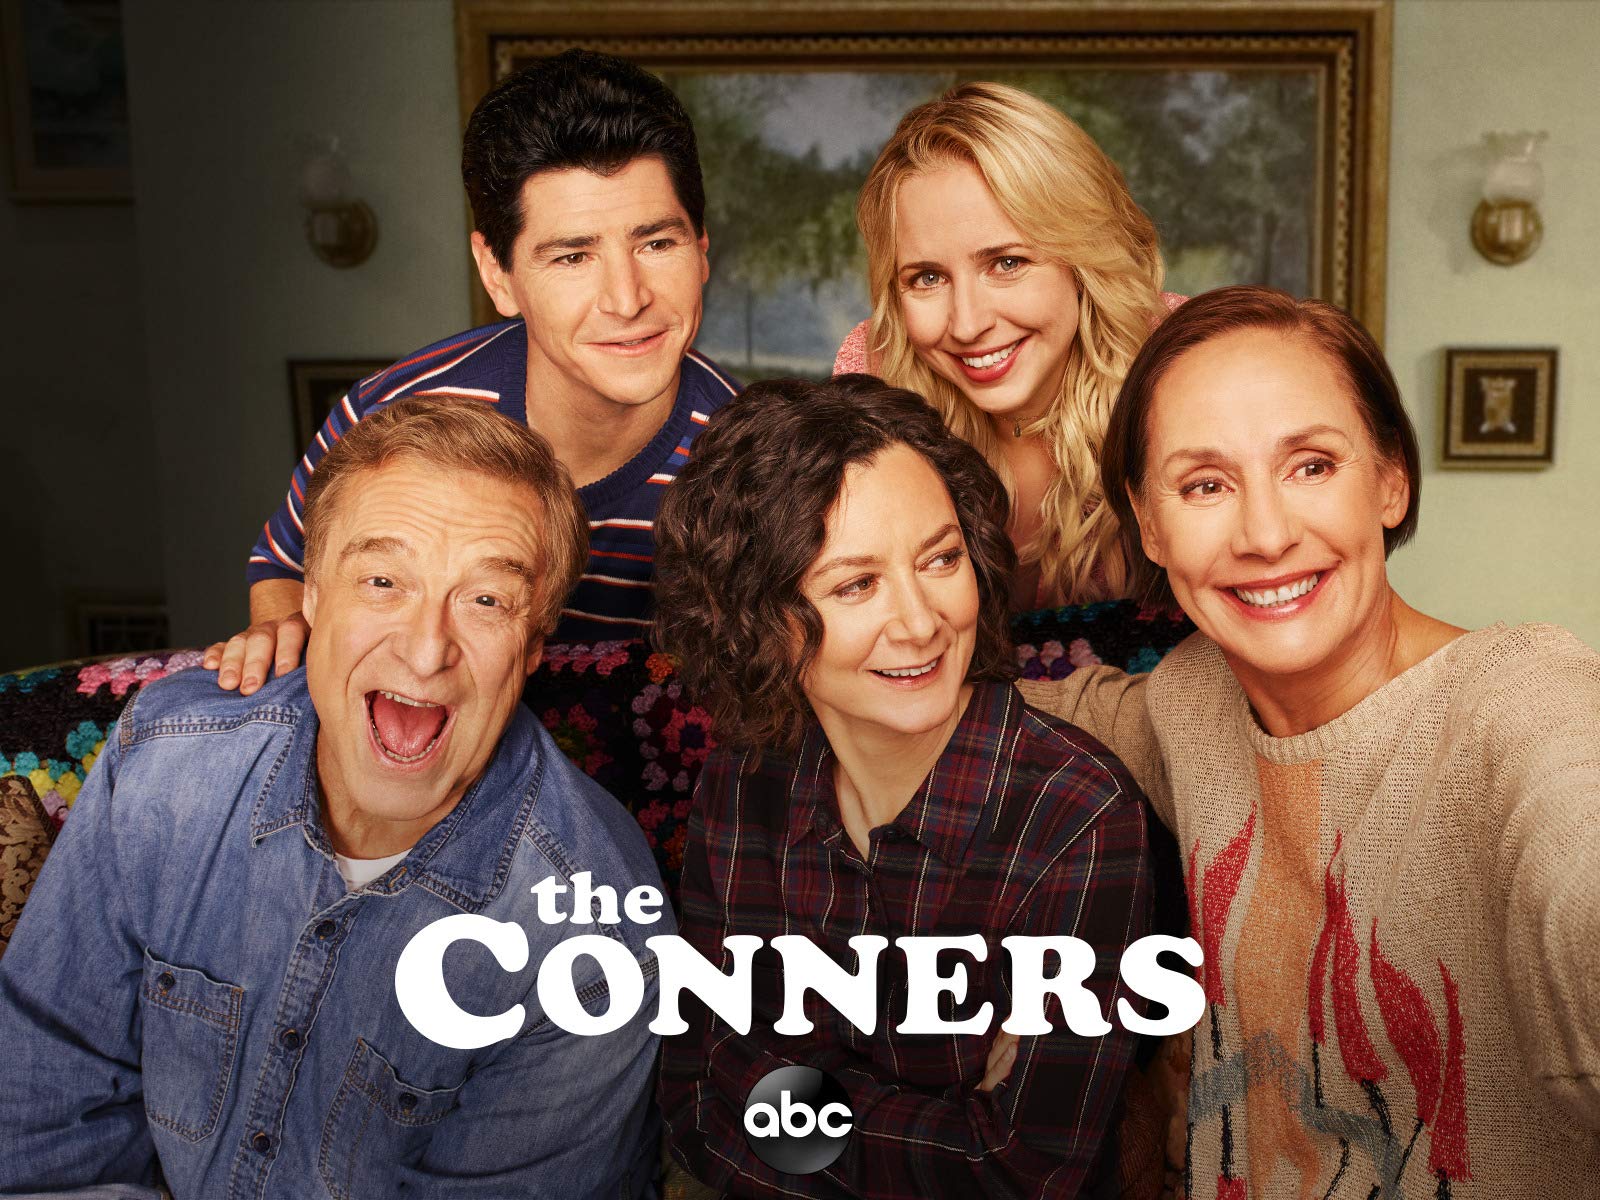 Tuesday Final Ratings 'The Conners' Live Episode on ABC Propels Series